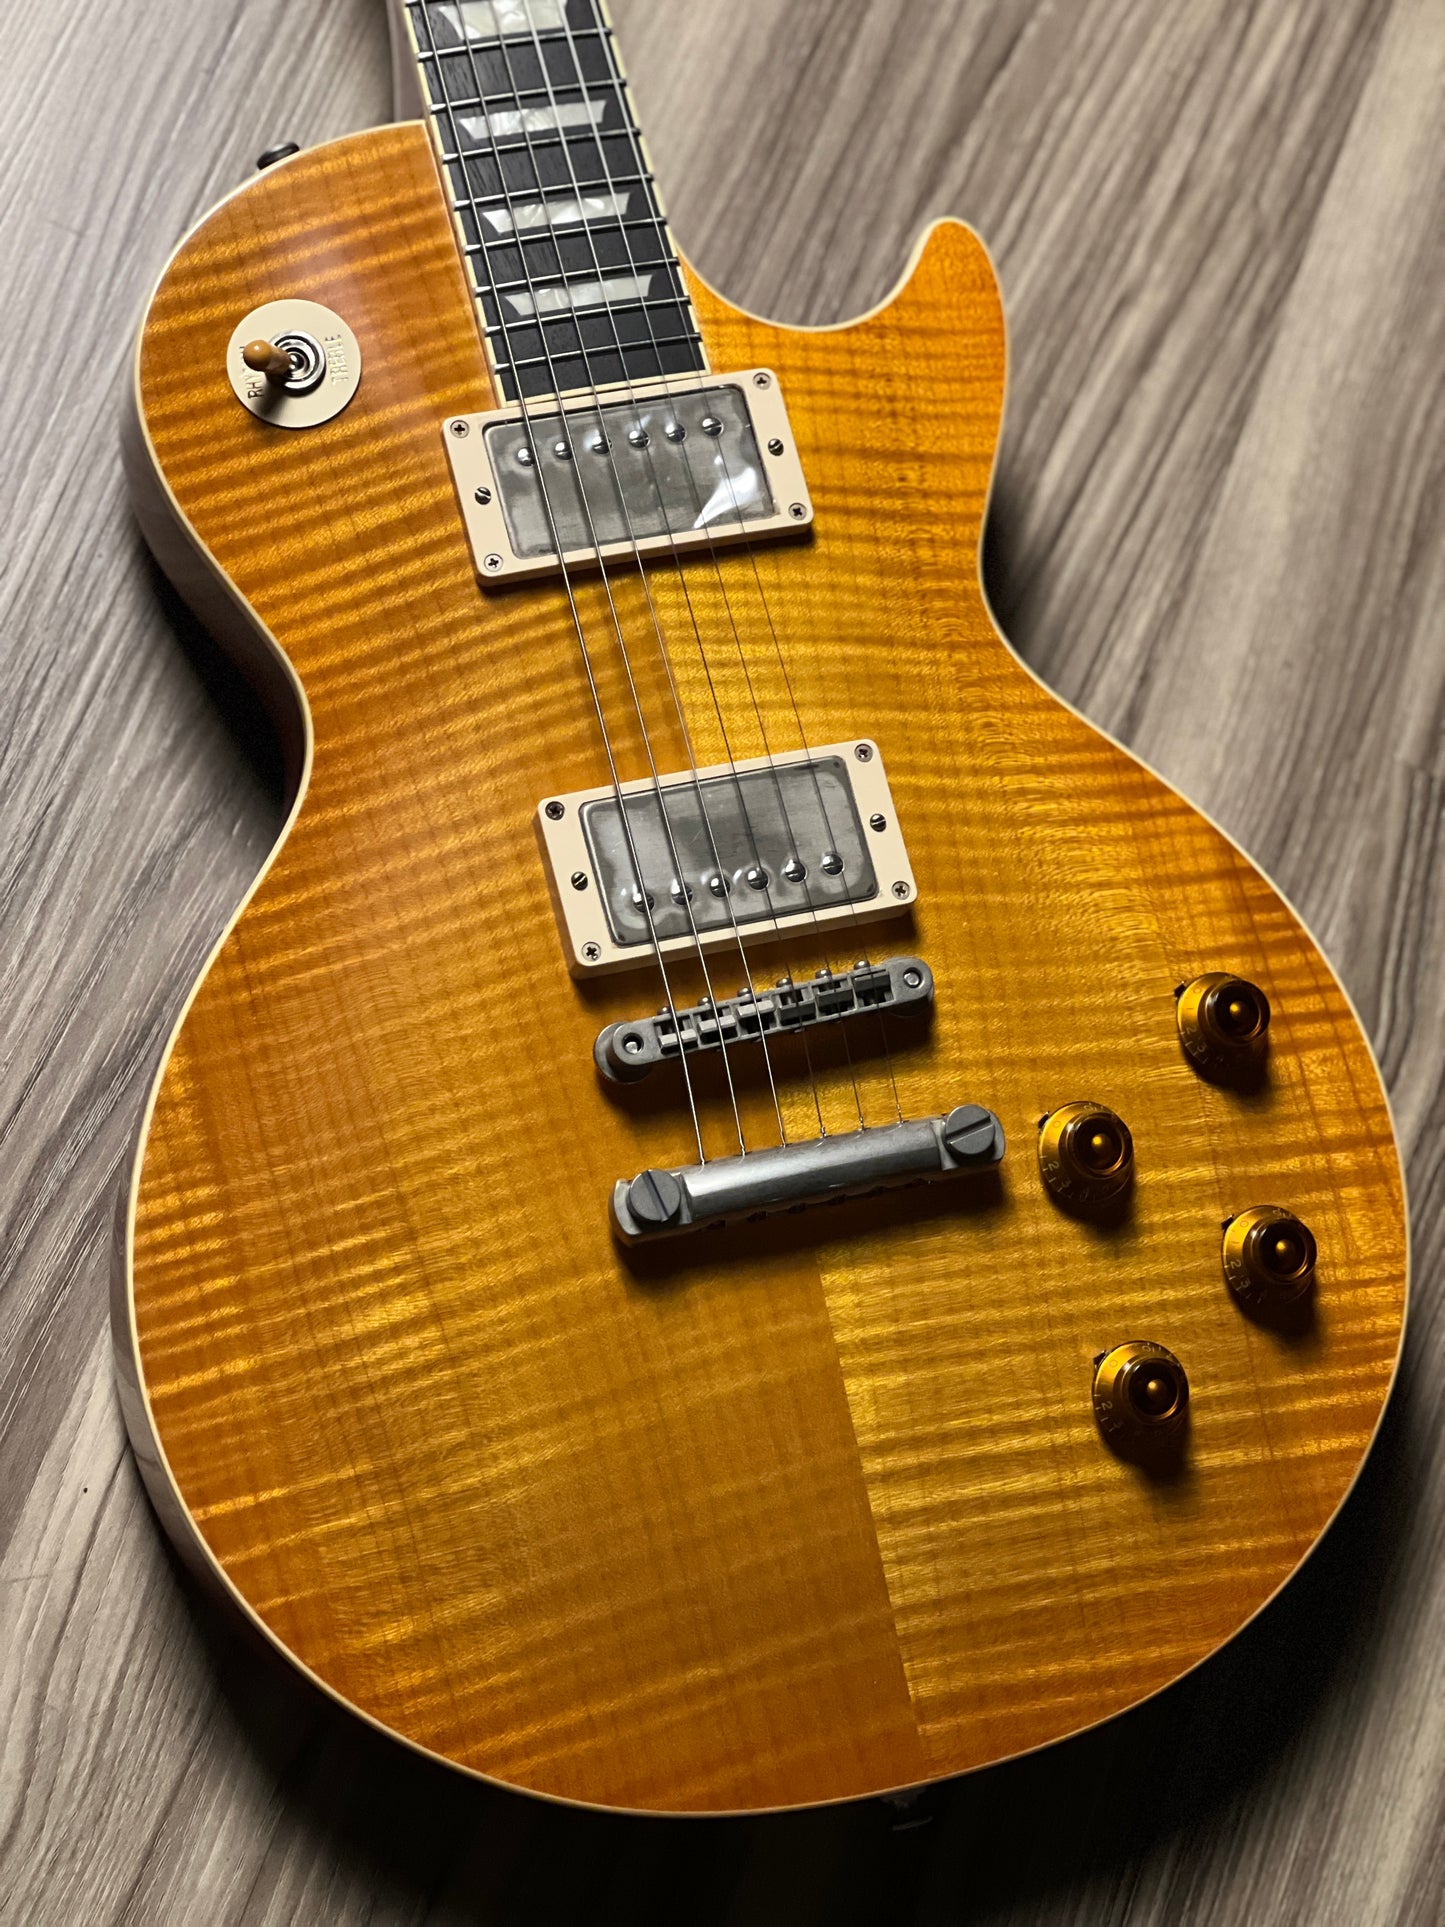 Tokai Love Rock LS150F-3A-RELIC SG/HB Premium Series Japan 3A Solid Flame Top in Honeyburst S/N 2449308